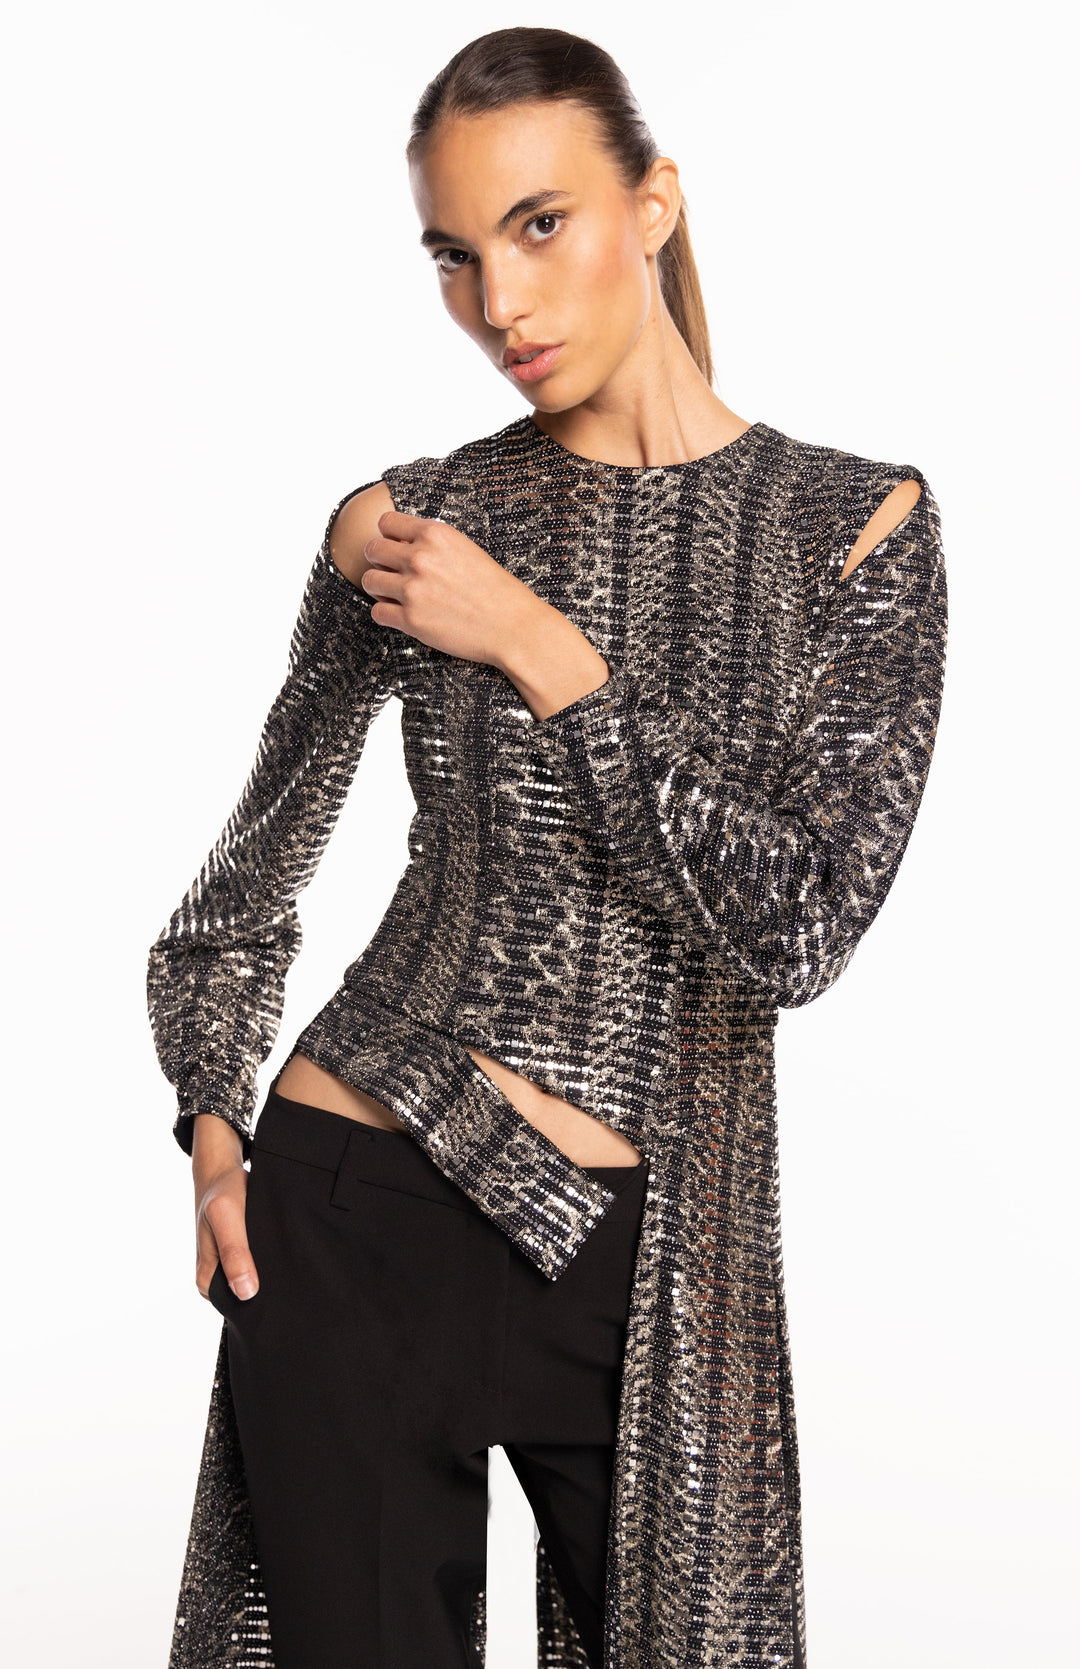 Valerie | Timeless Edge: Long Metallic Top With Tails